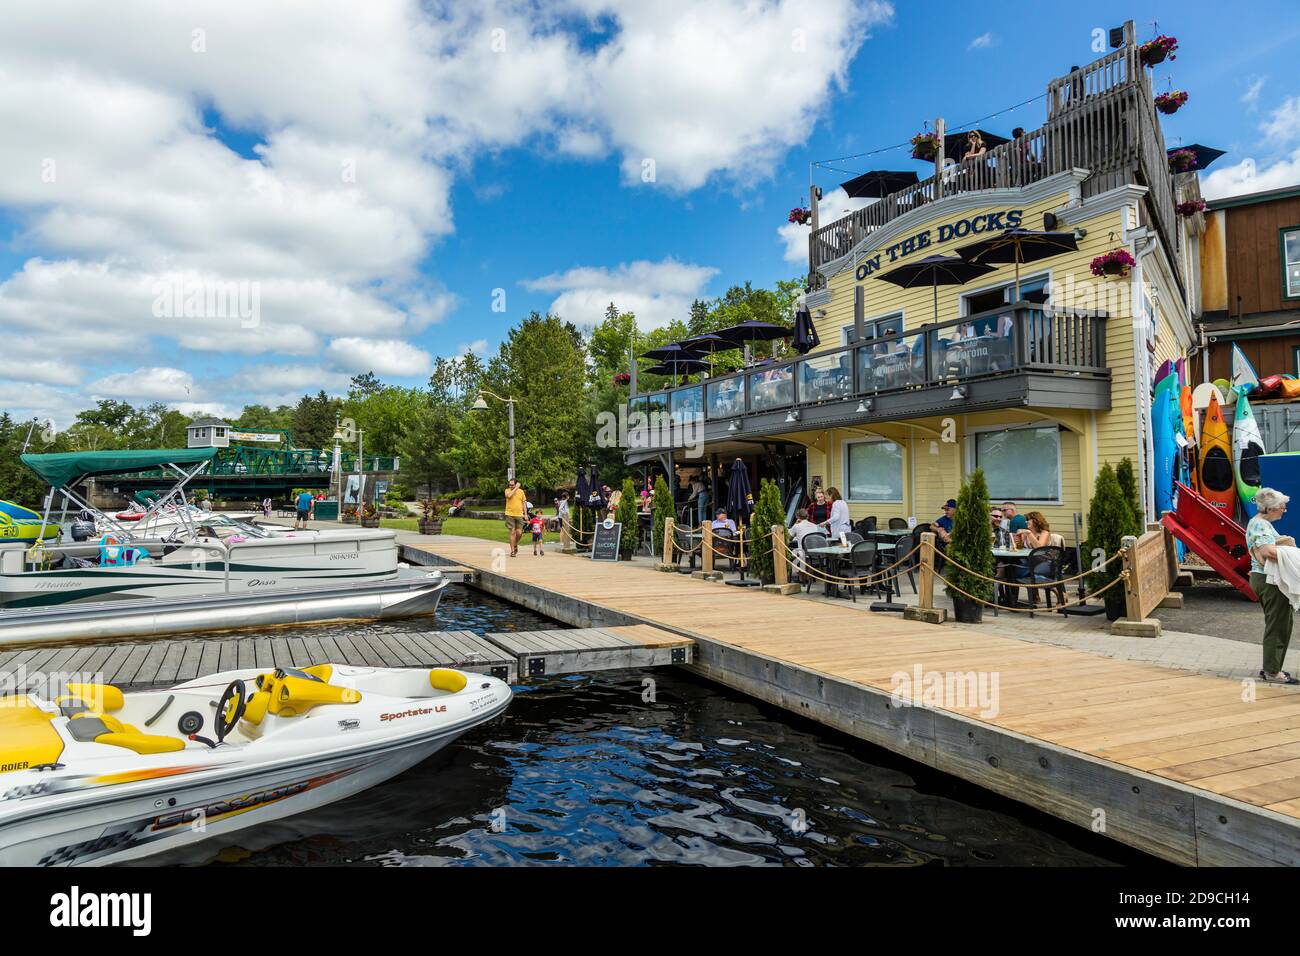 The Town Docks and busnesses along the Muskoka River in Huntsville, Ontario. Stock Photo